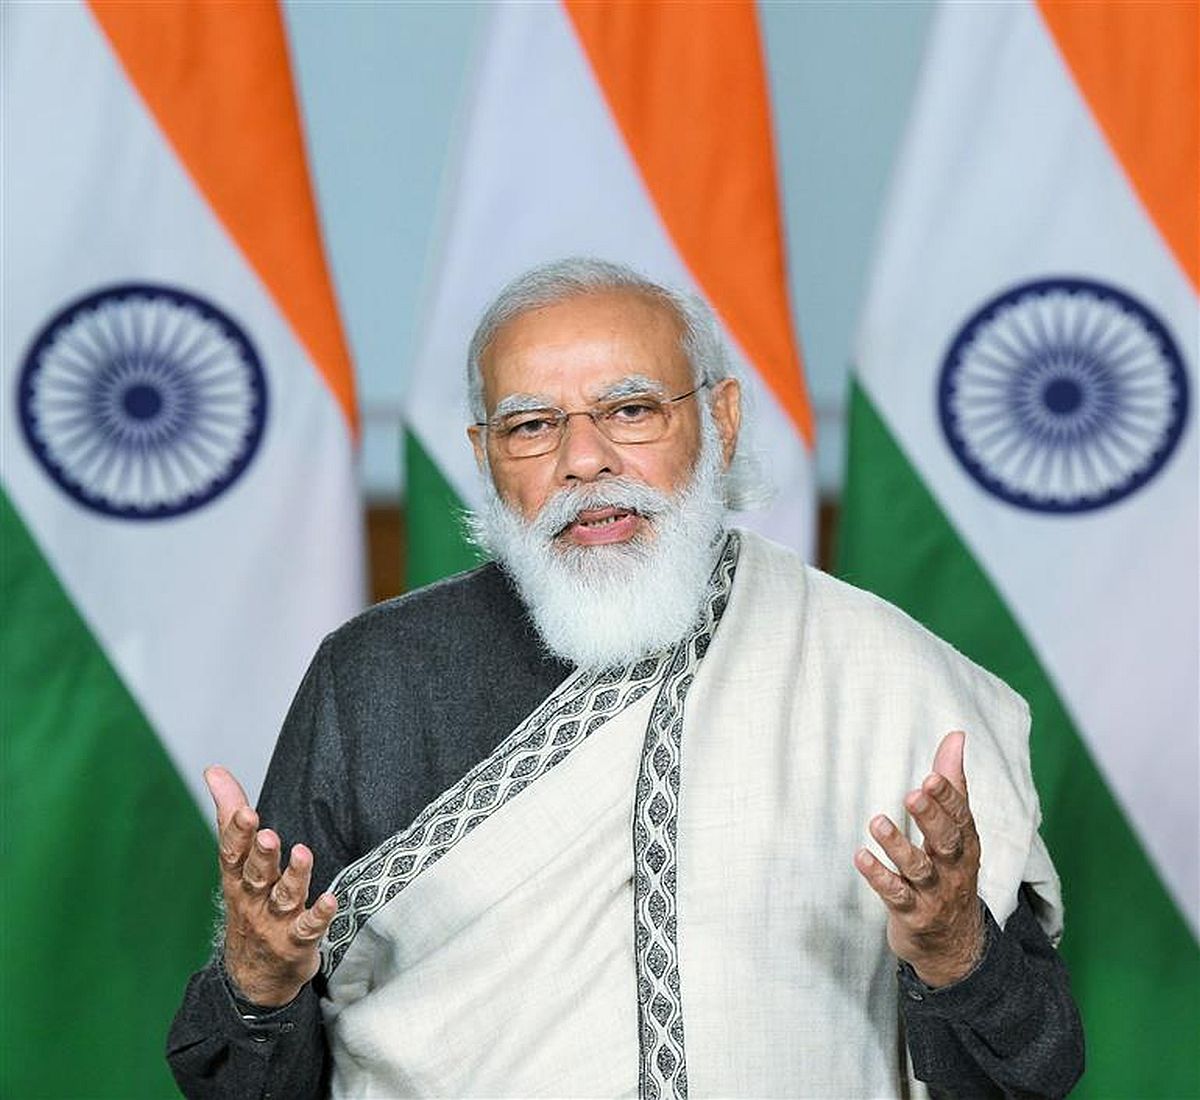 PM’s reform pitch on Bandh eve: ‘Can’t build new age with old laws’